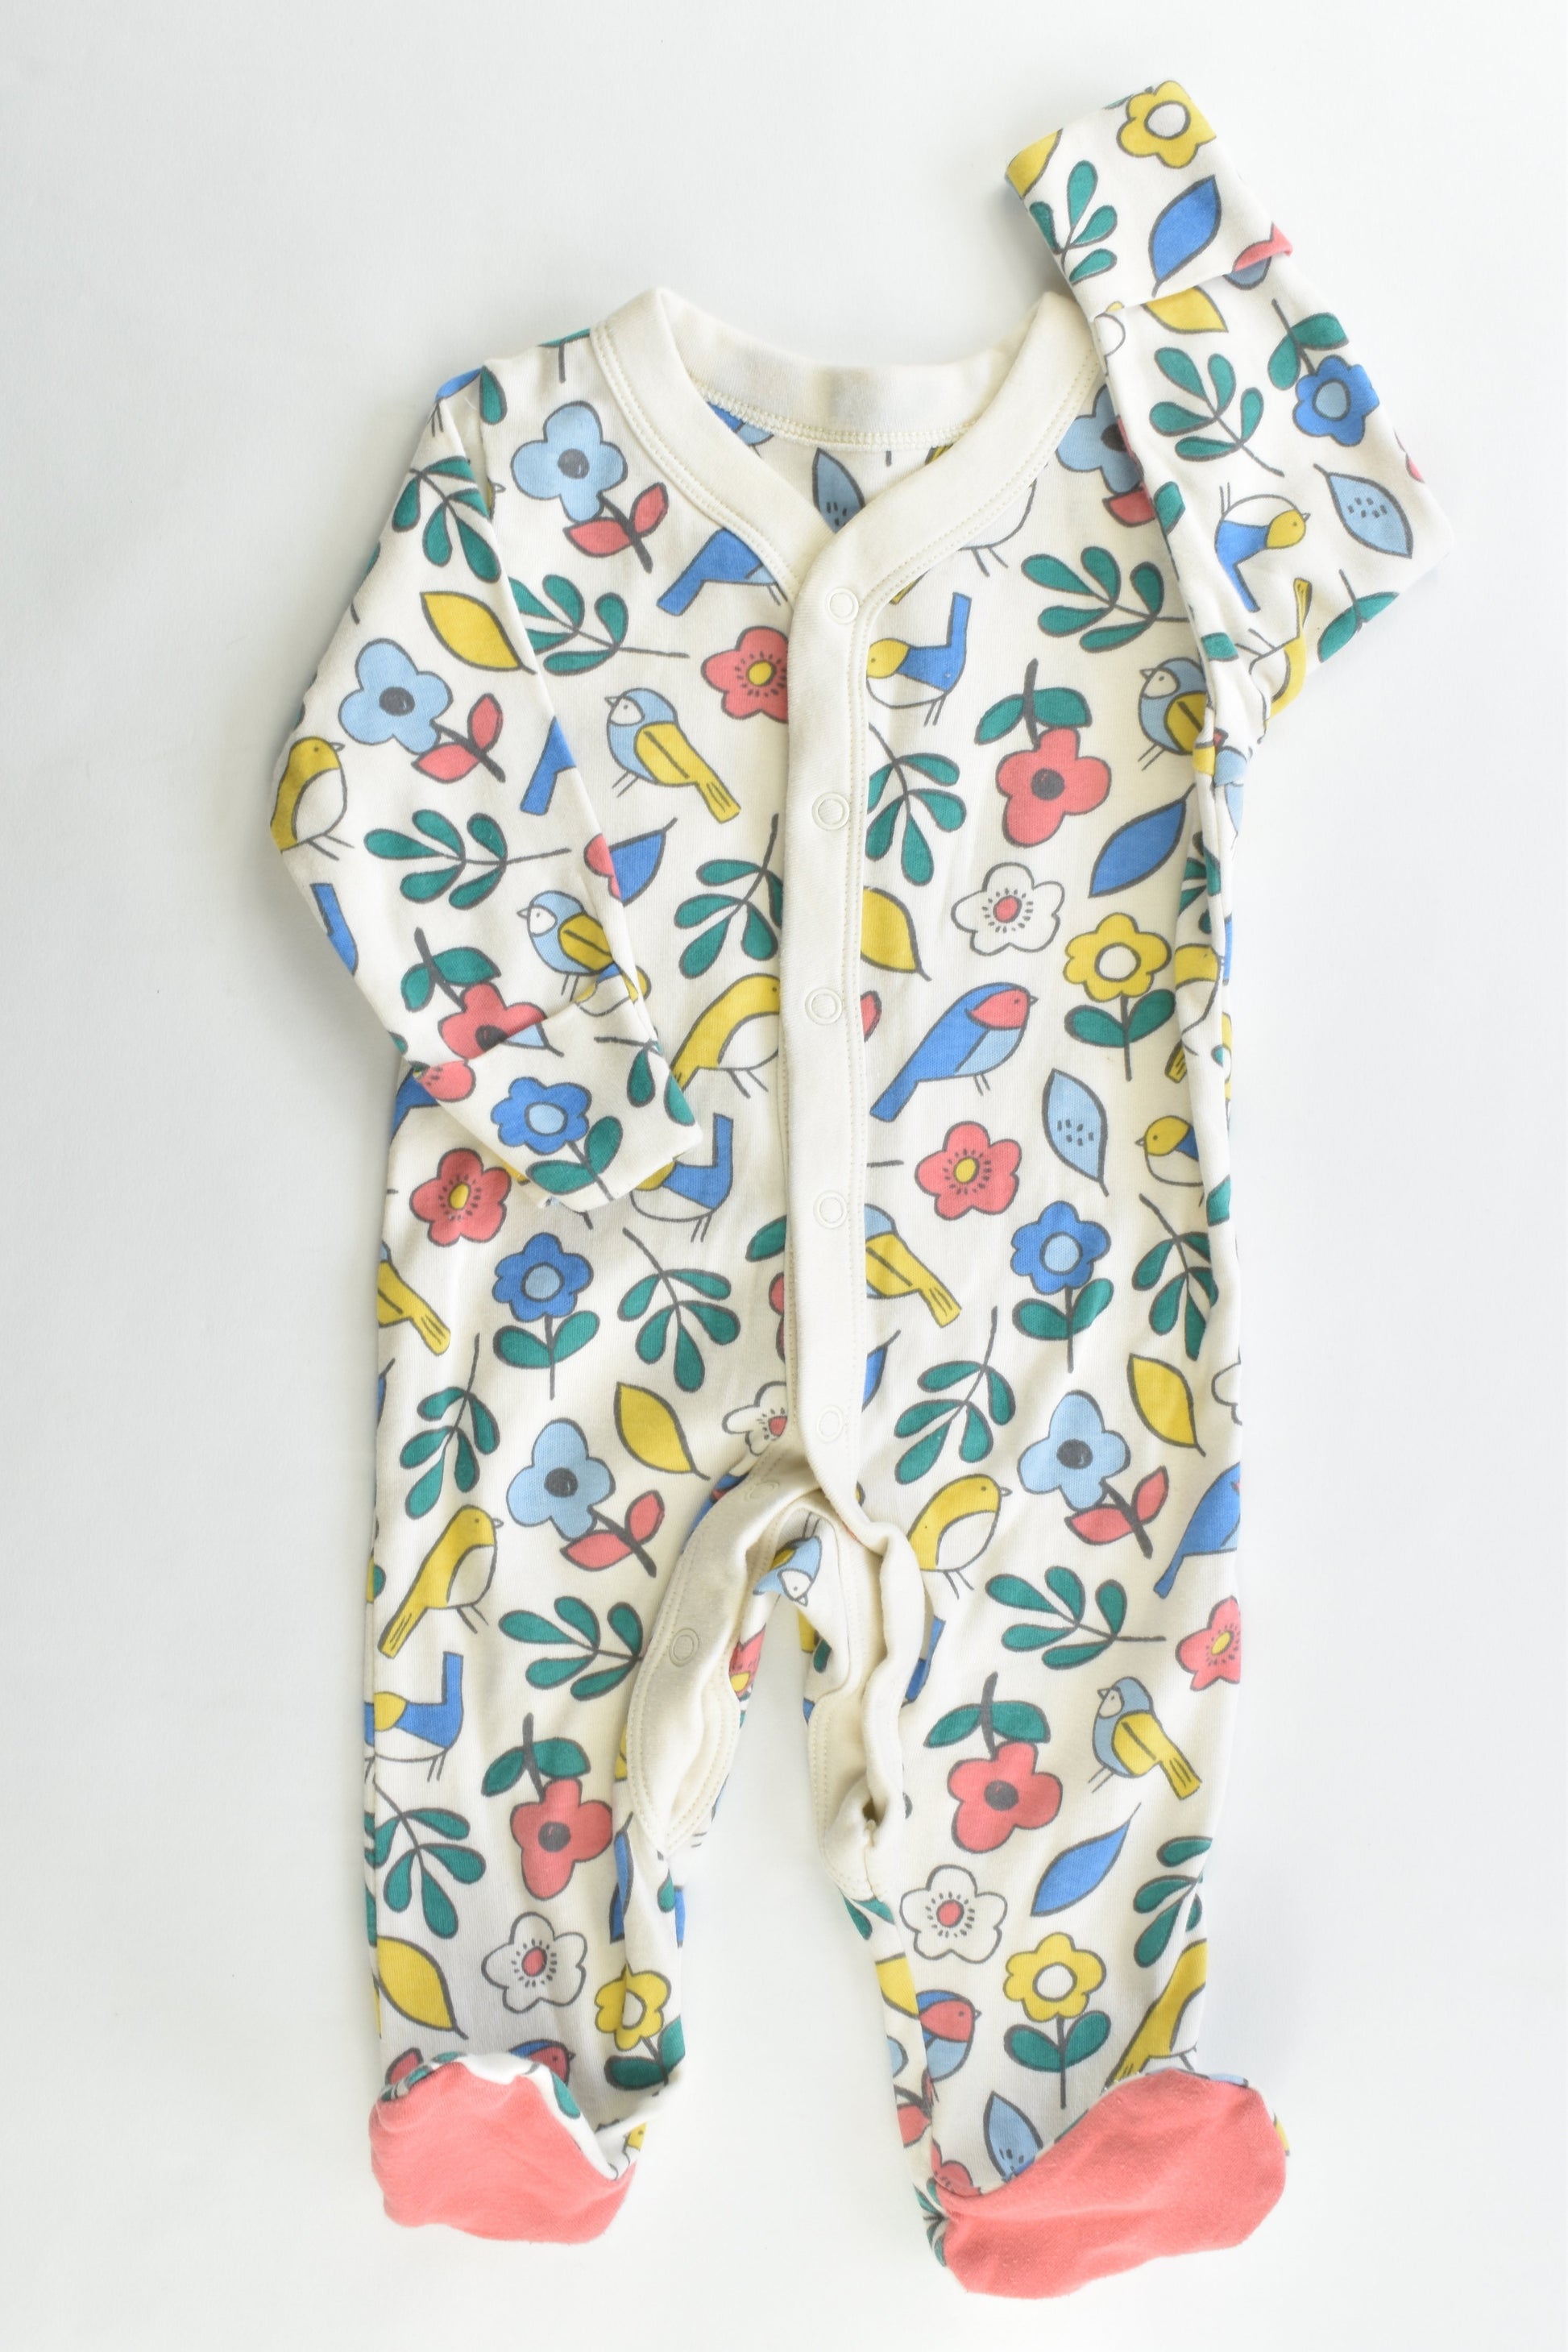 M&S Size 0-3 months (62 cm) Flowers and Birds Footed Romper